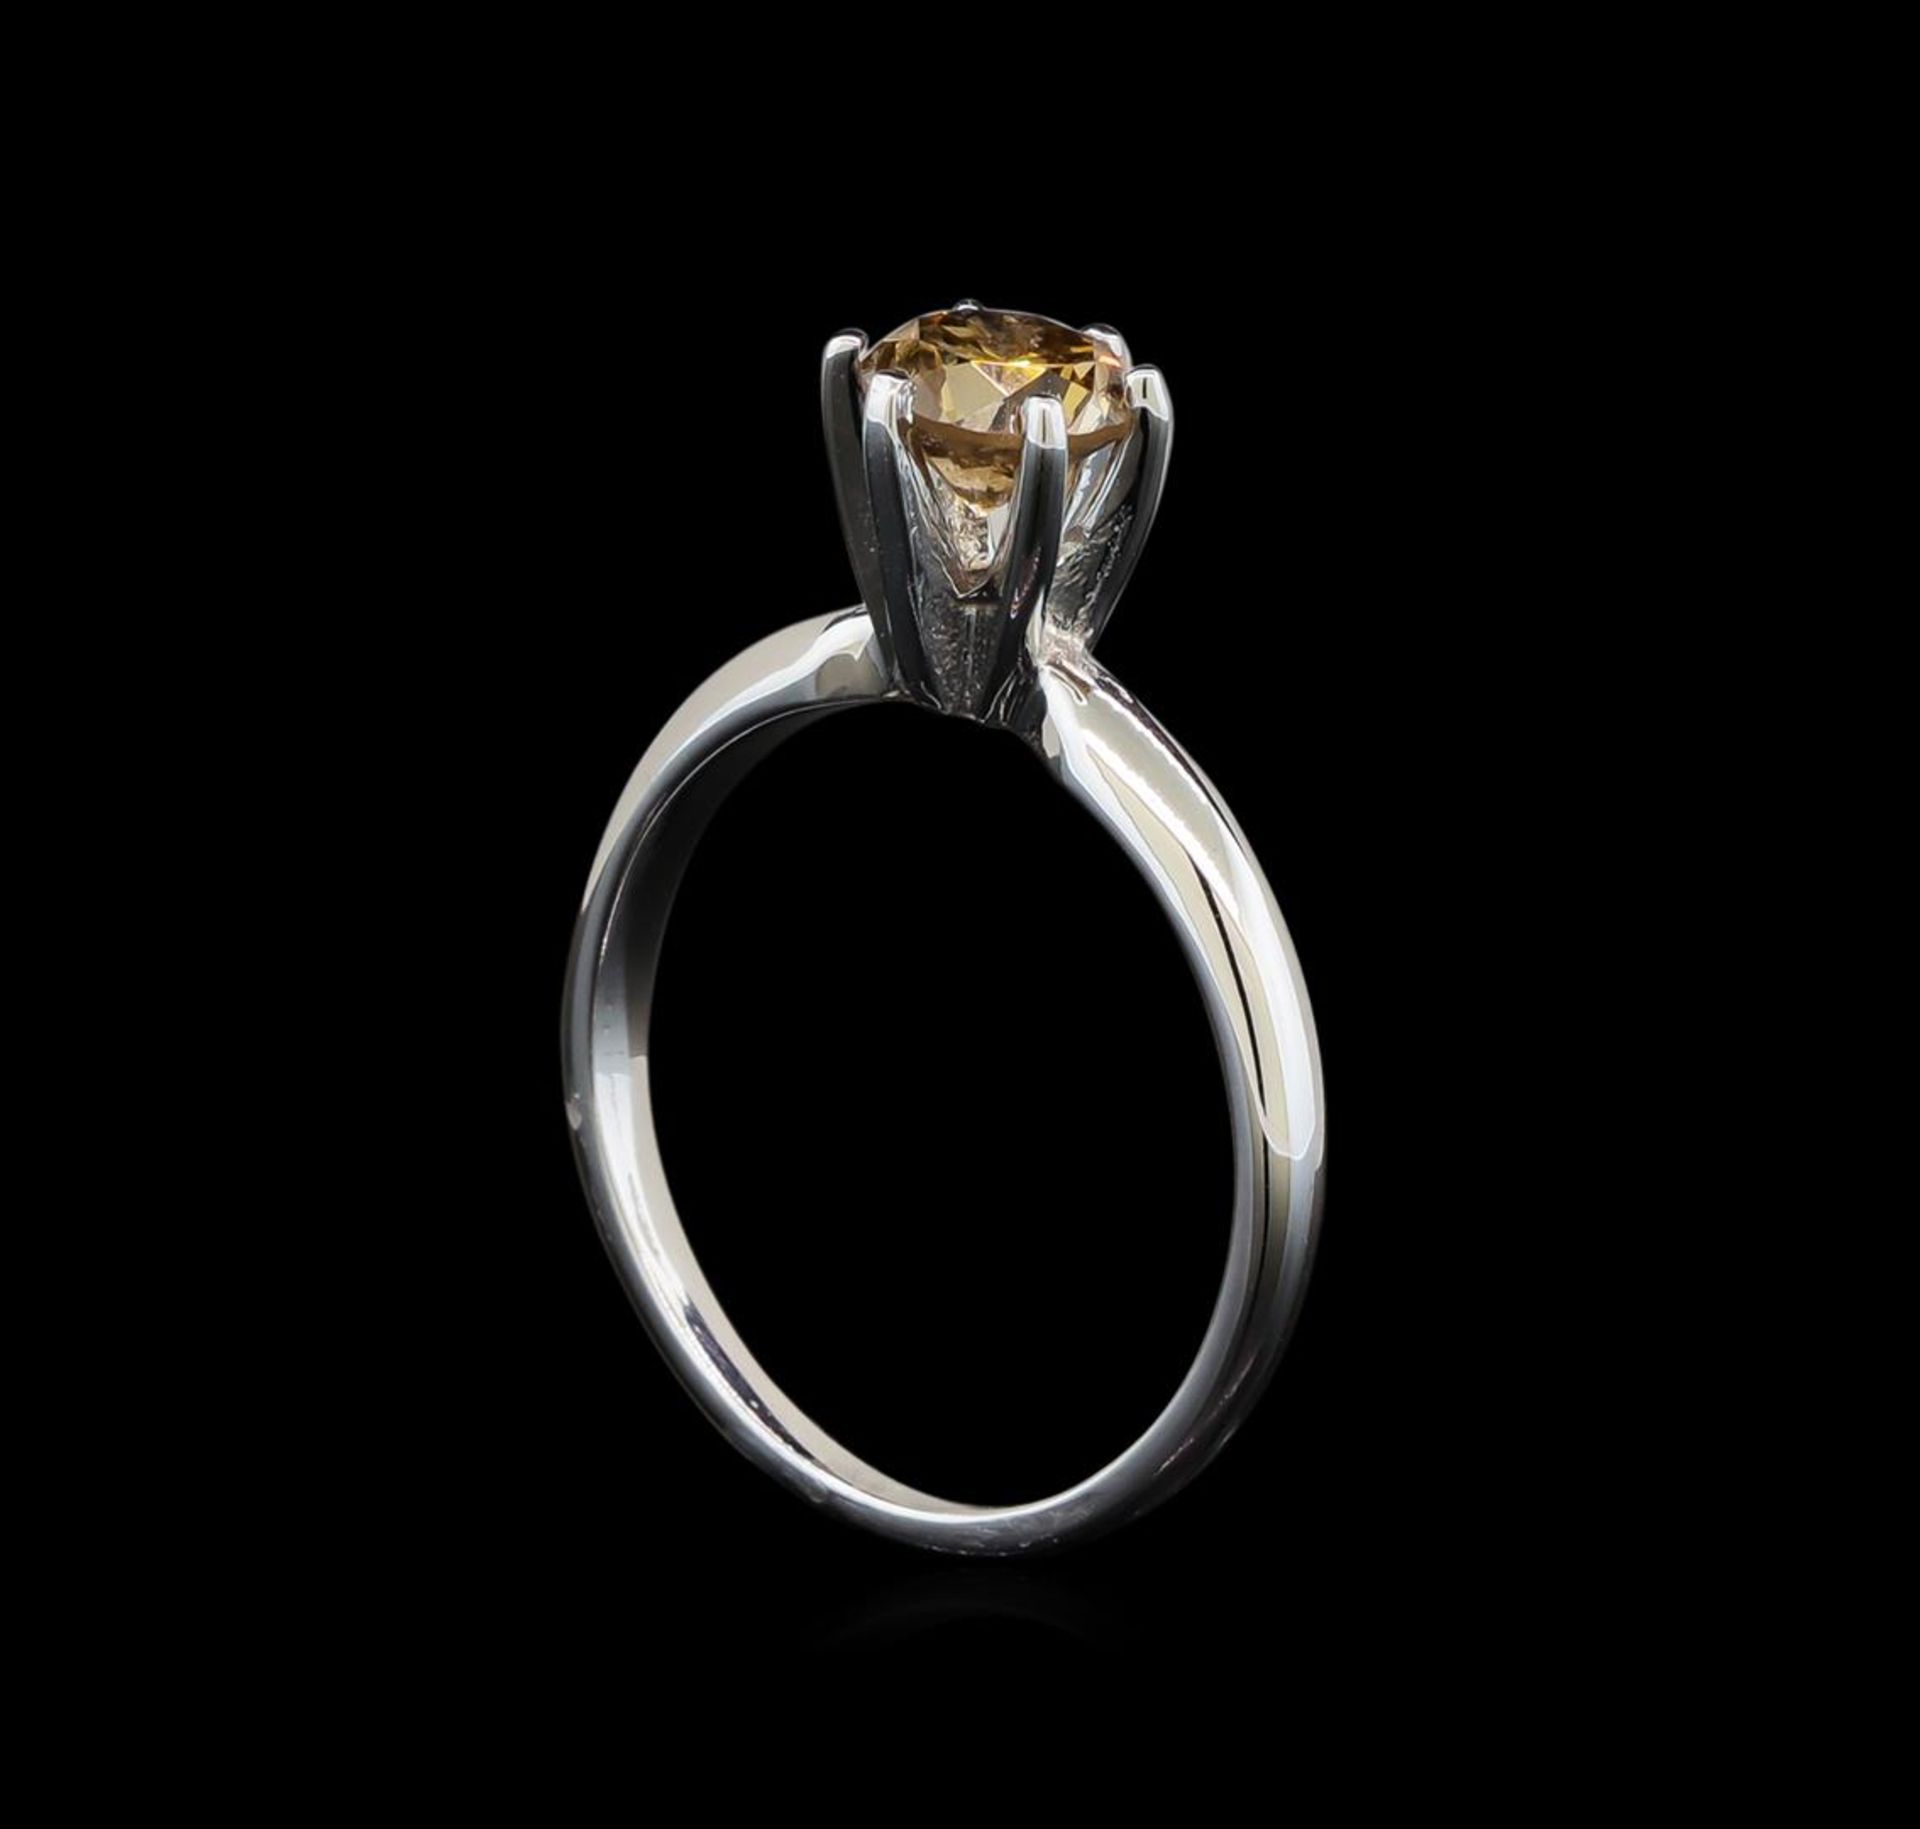 14KT White Gold 0.80 ct Round Cut Fancy Brown Diamond Solitaire Ring - Image 4 of 5